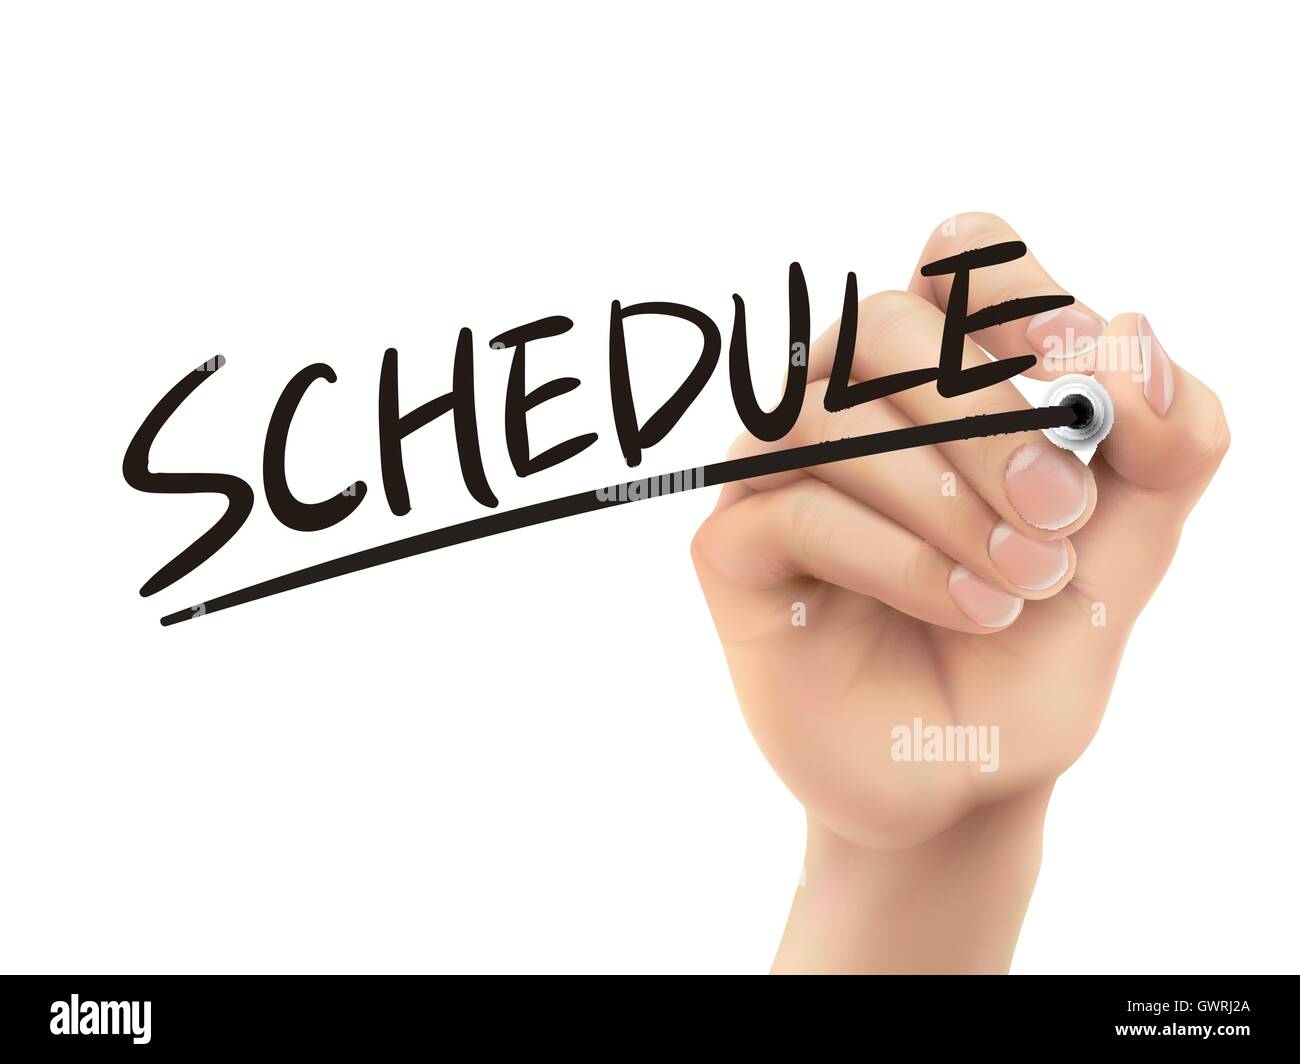 Schedule written by hand, 3D illustration realistic hand writing on transparent board Stock Vector